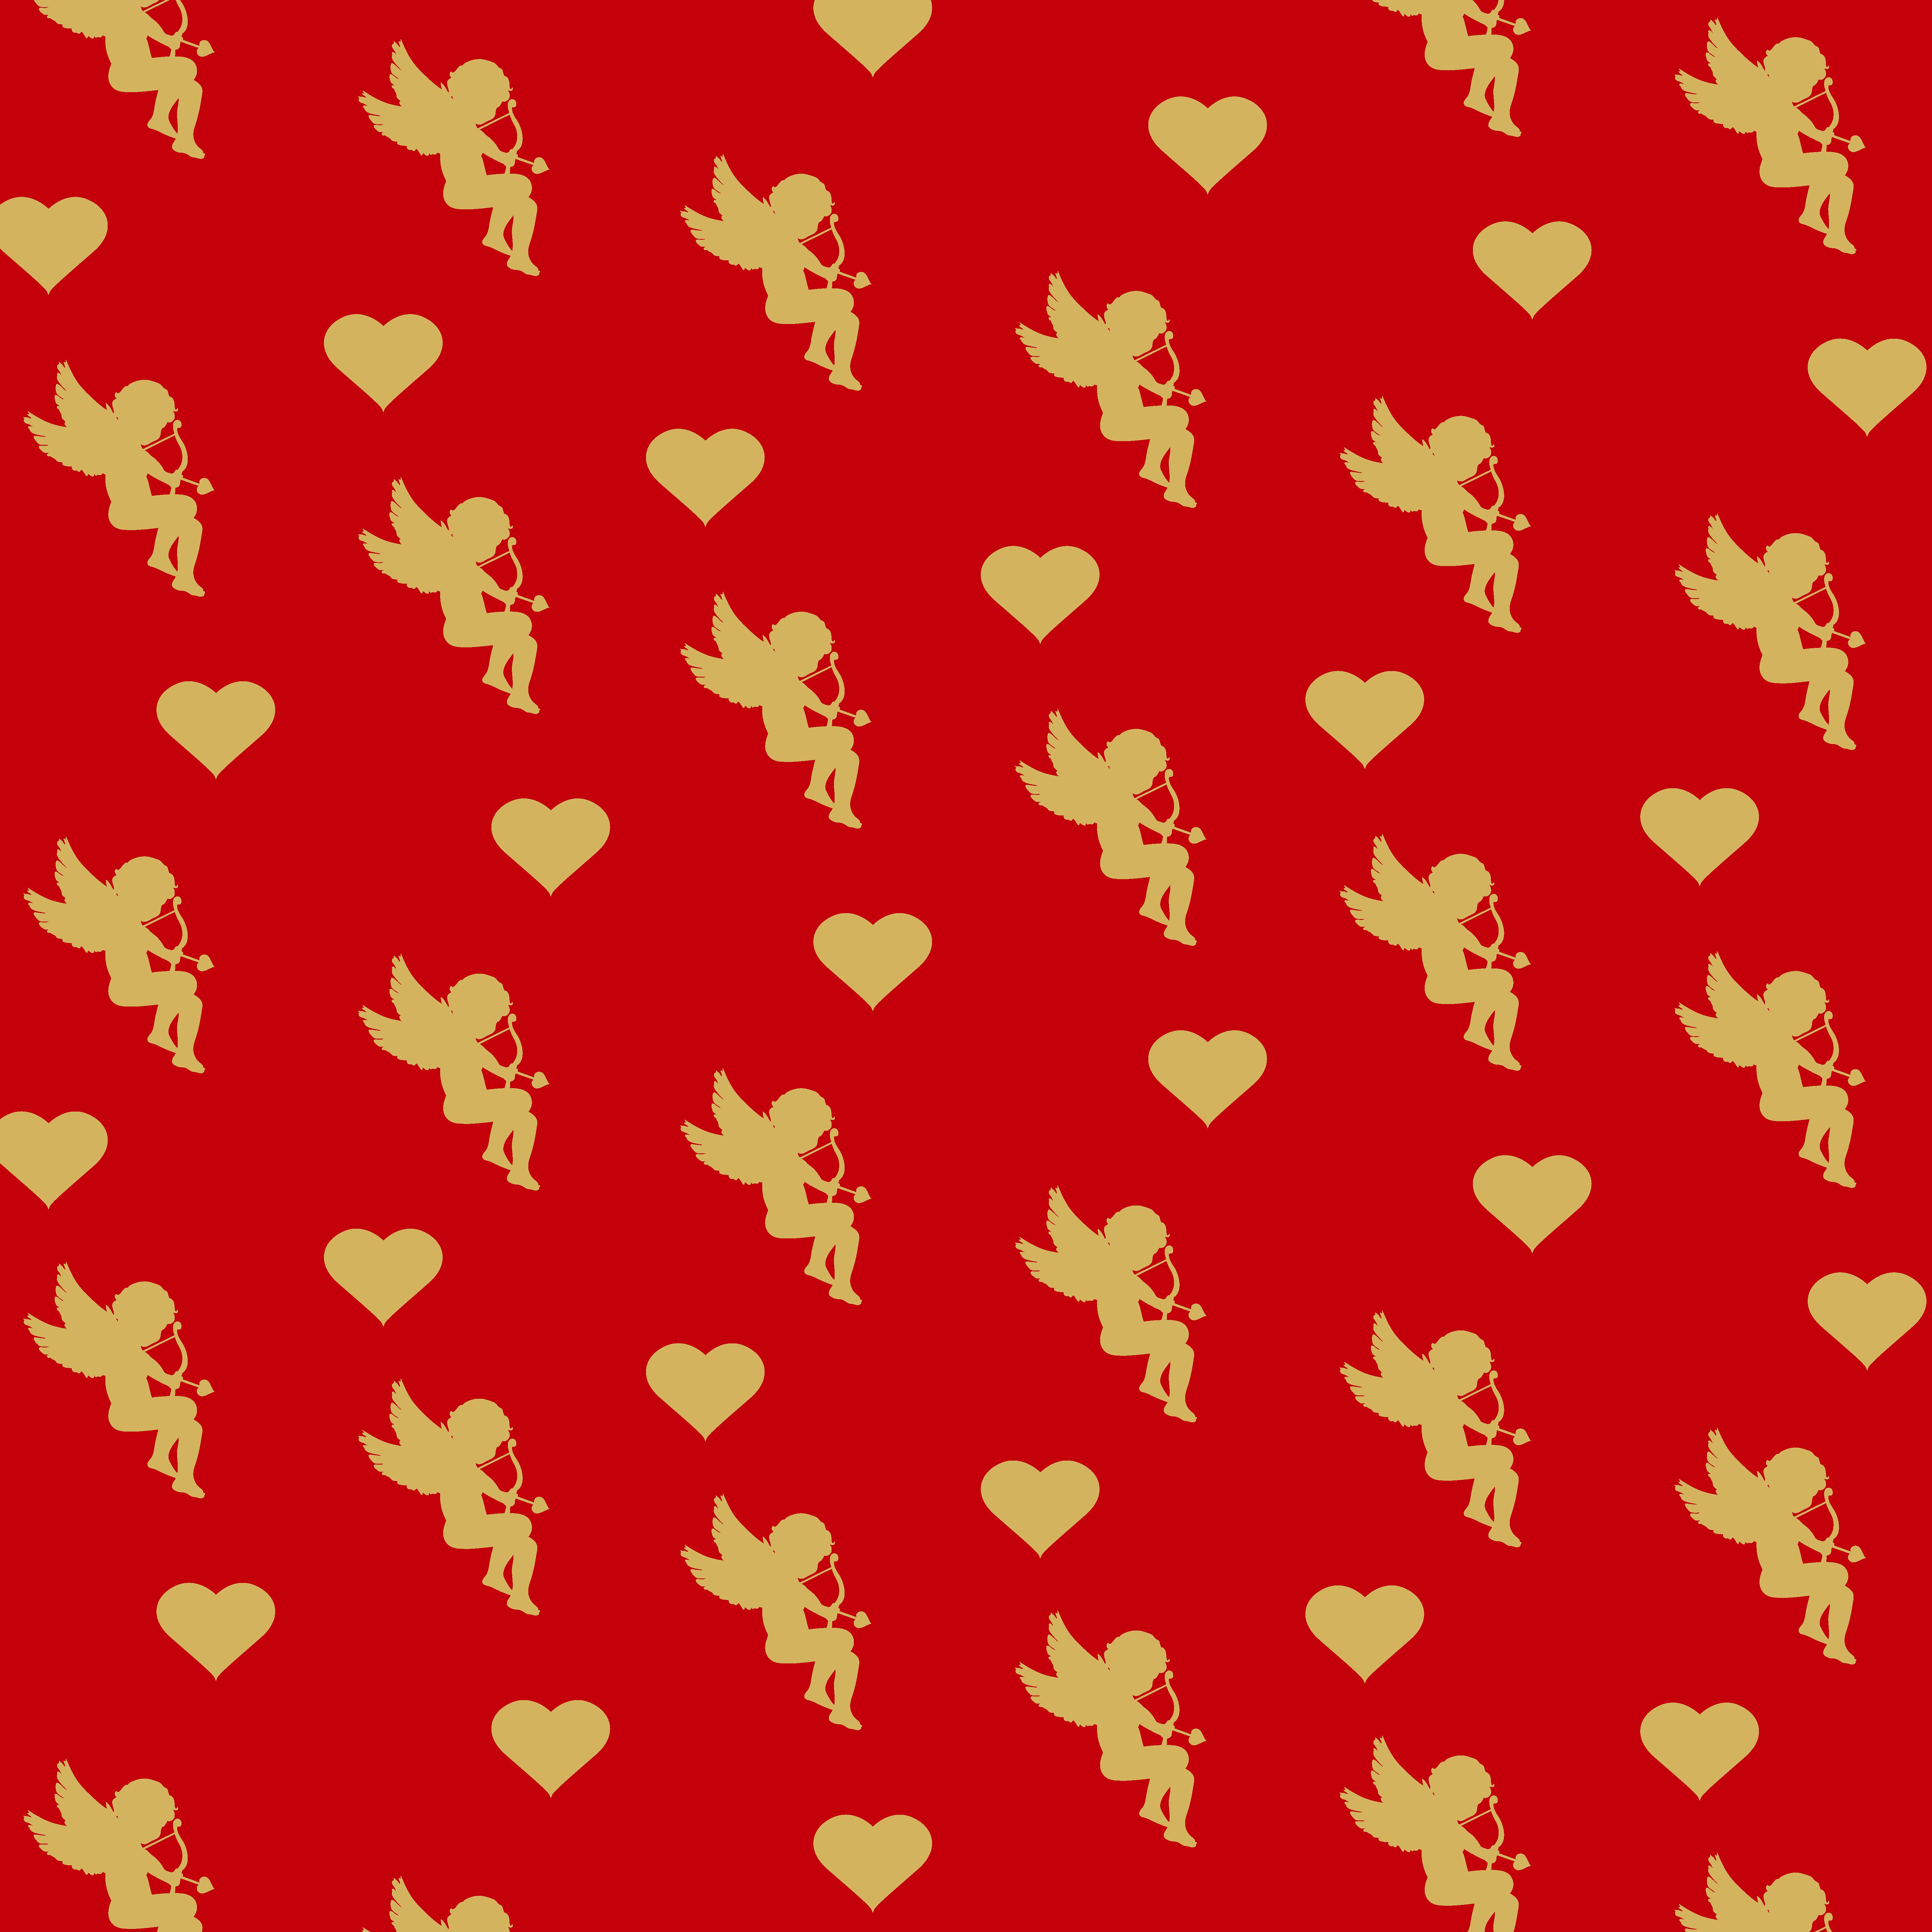 Wrapping paper. Valentine's Day ~ Illustrations ~ Creative Market